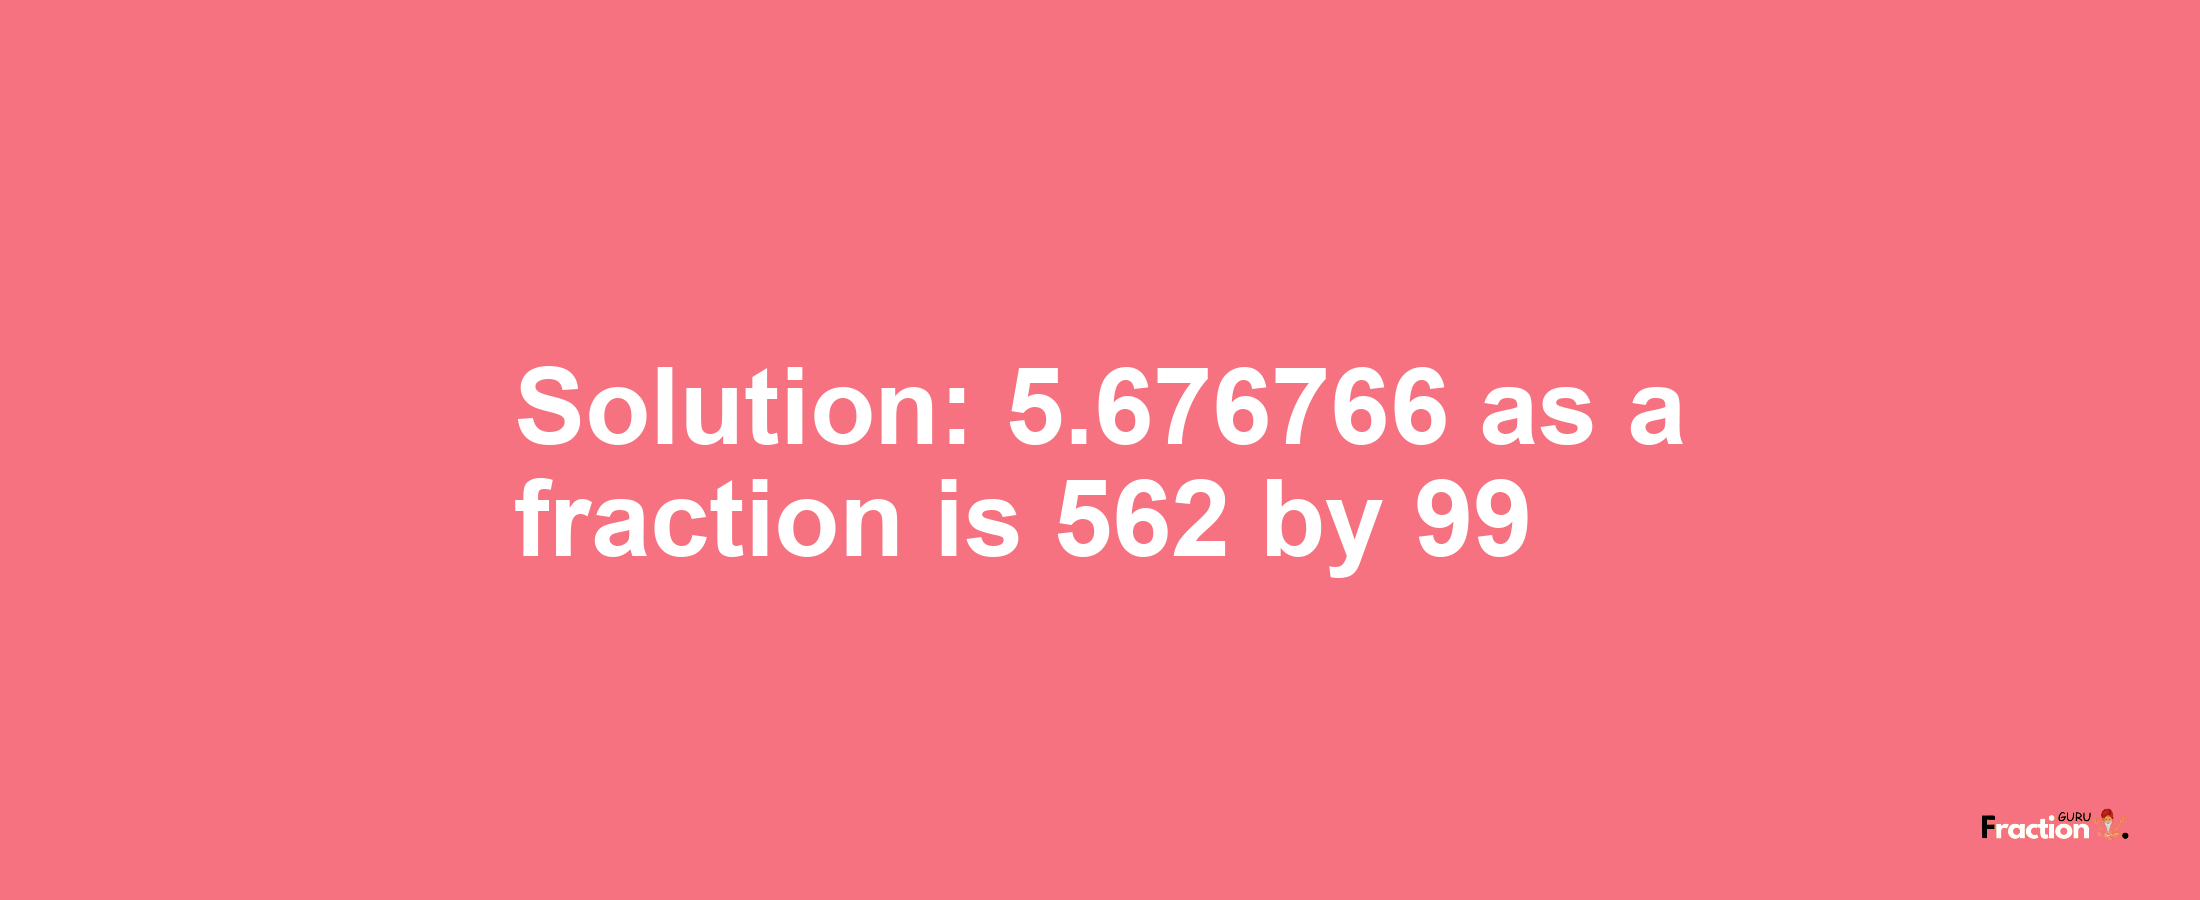 Solution:5.676766 as a fraction is 562/99